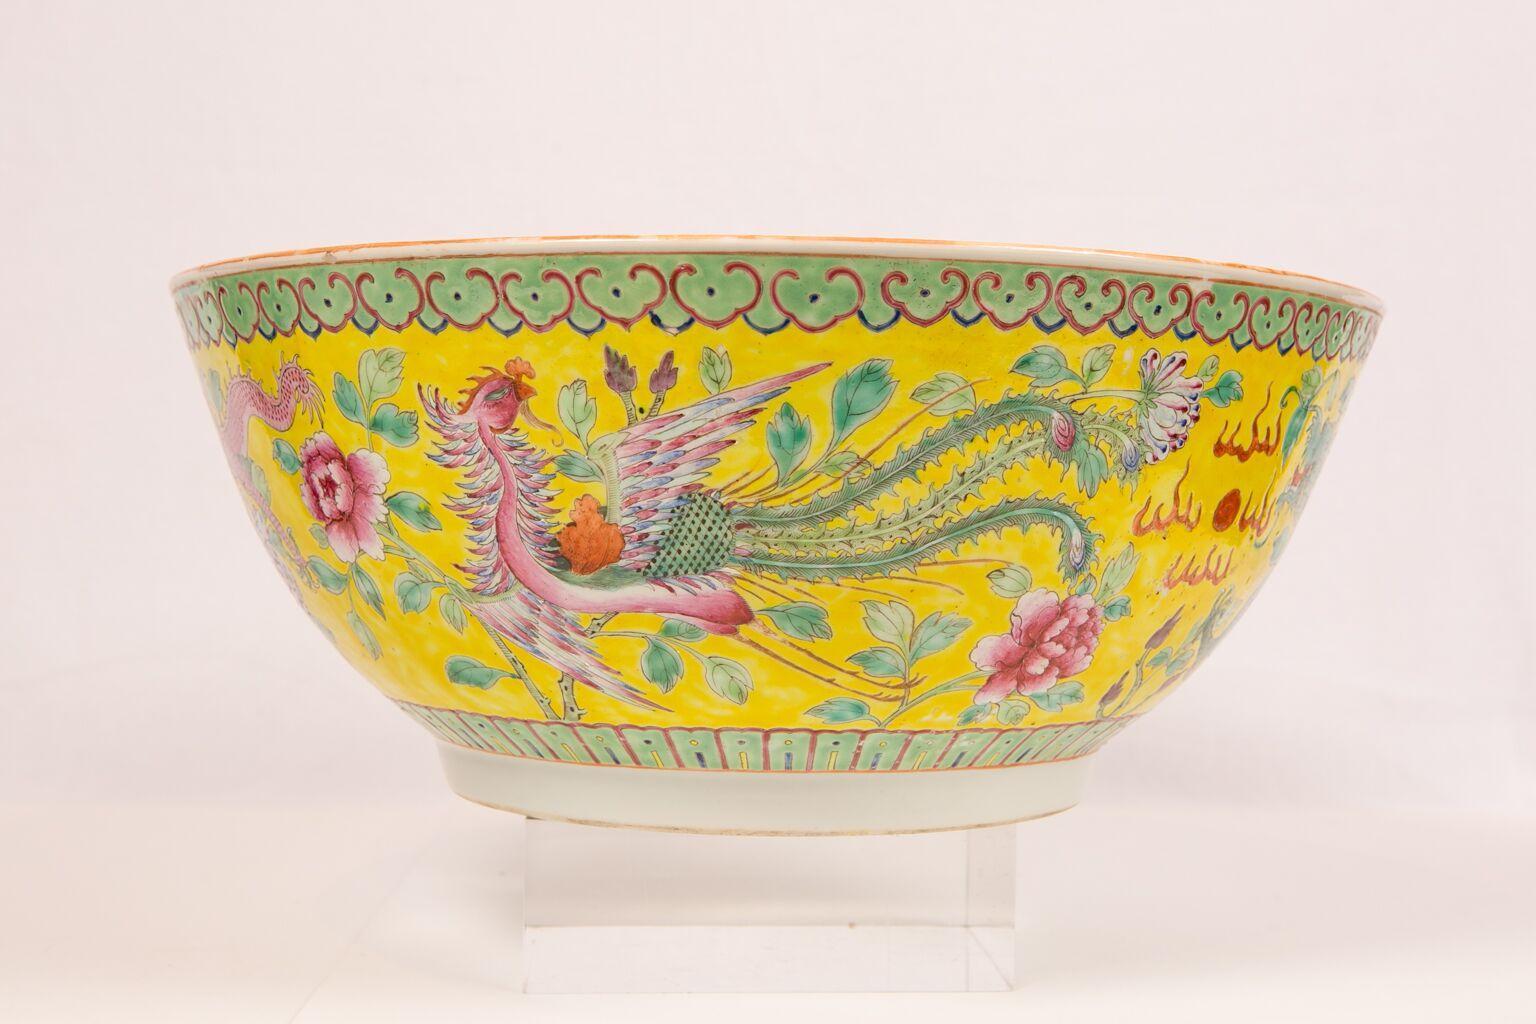 A pair of vigorous dragons with a pair of splendid phoenixes grace the exterior of the bowl. In traditional Chinese symbolism, a dragon represents power and the male world while a phoenix stands for beauty and the female domain. In traditional